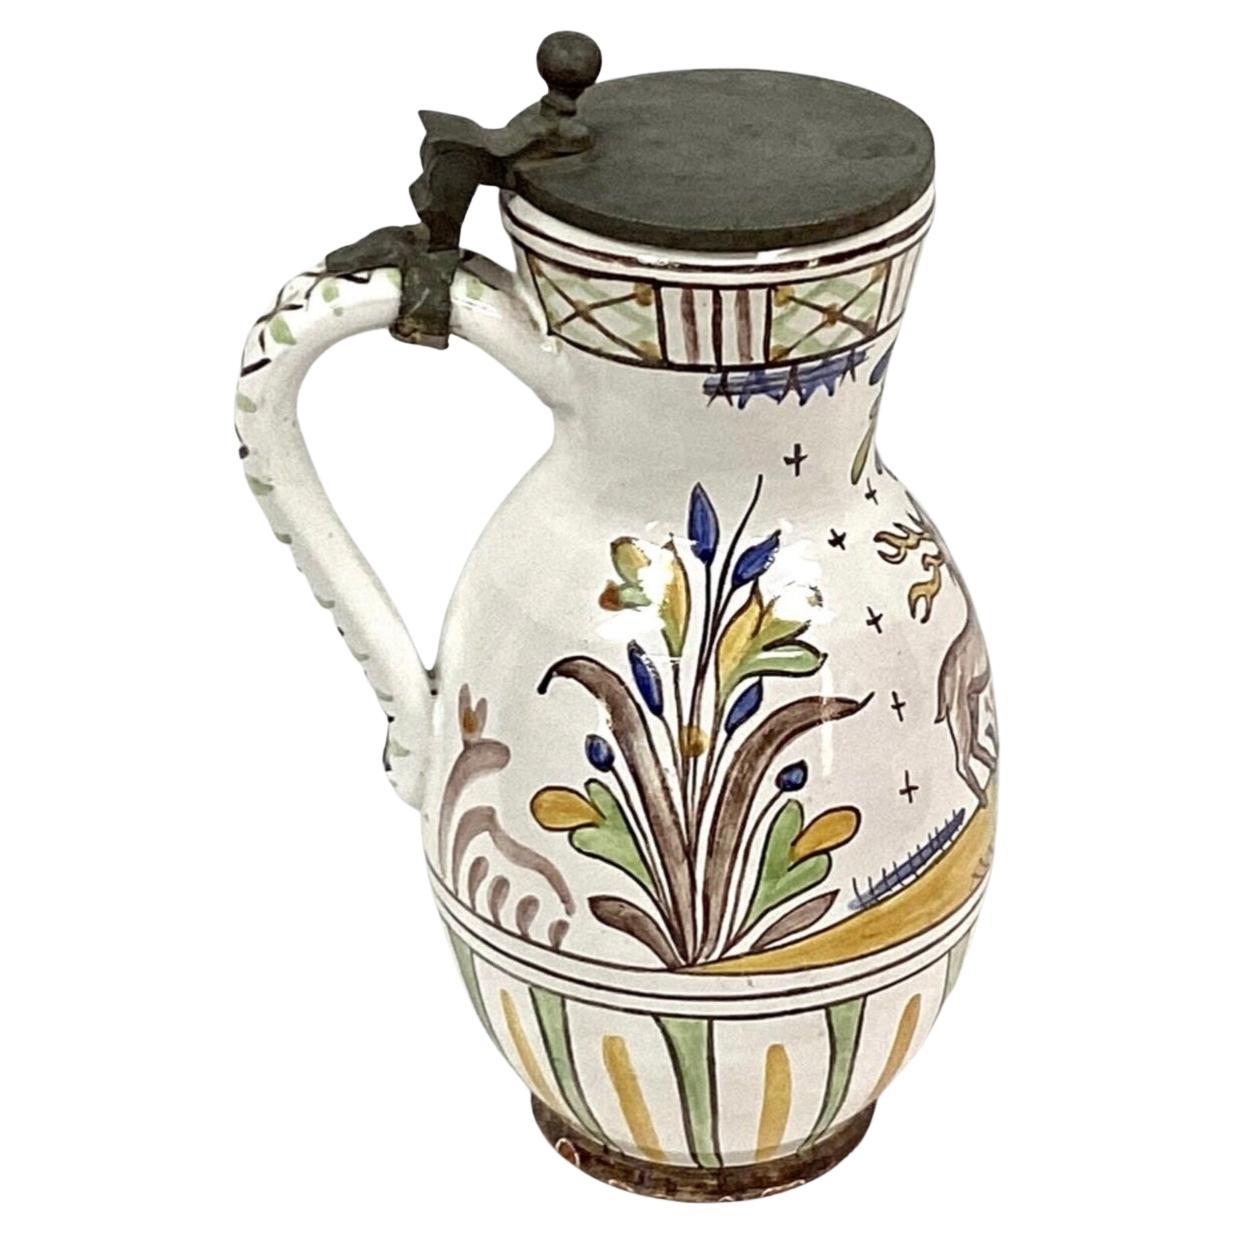 German Faience pitcher/jug with hinged pewter lid and handle. Hand painted floral design, along with stag and dog, on white background. Top of lid is monogrammed. Has minor wear from lid on rim of jar and on bottom. Inside is in excellent condition